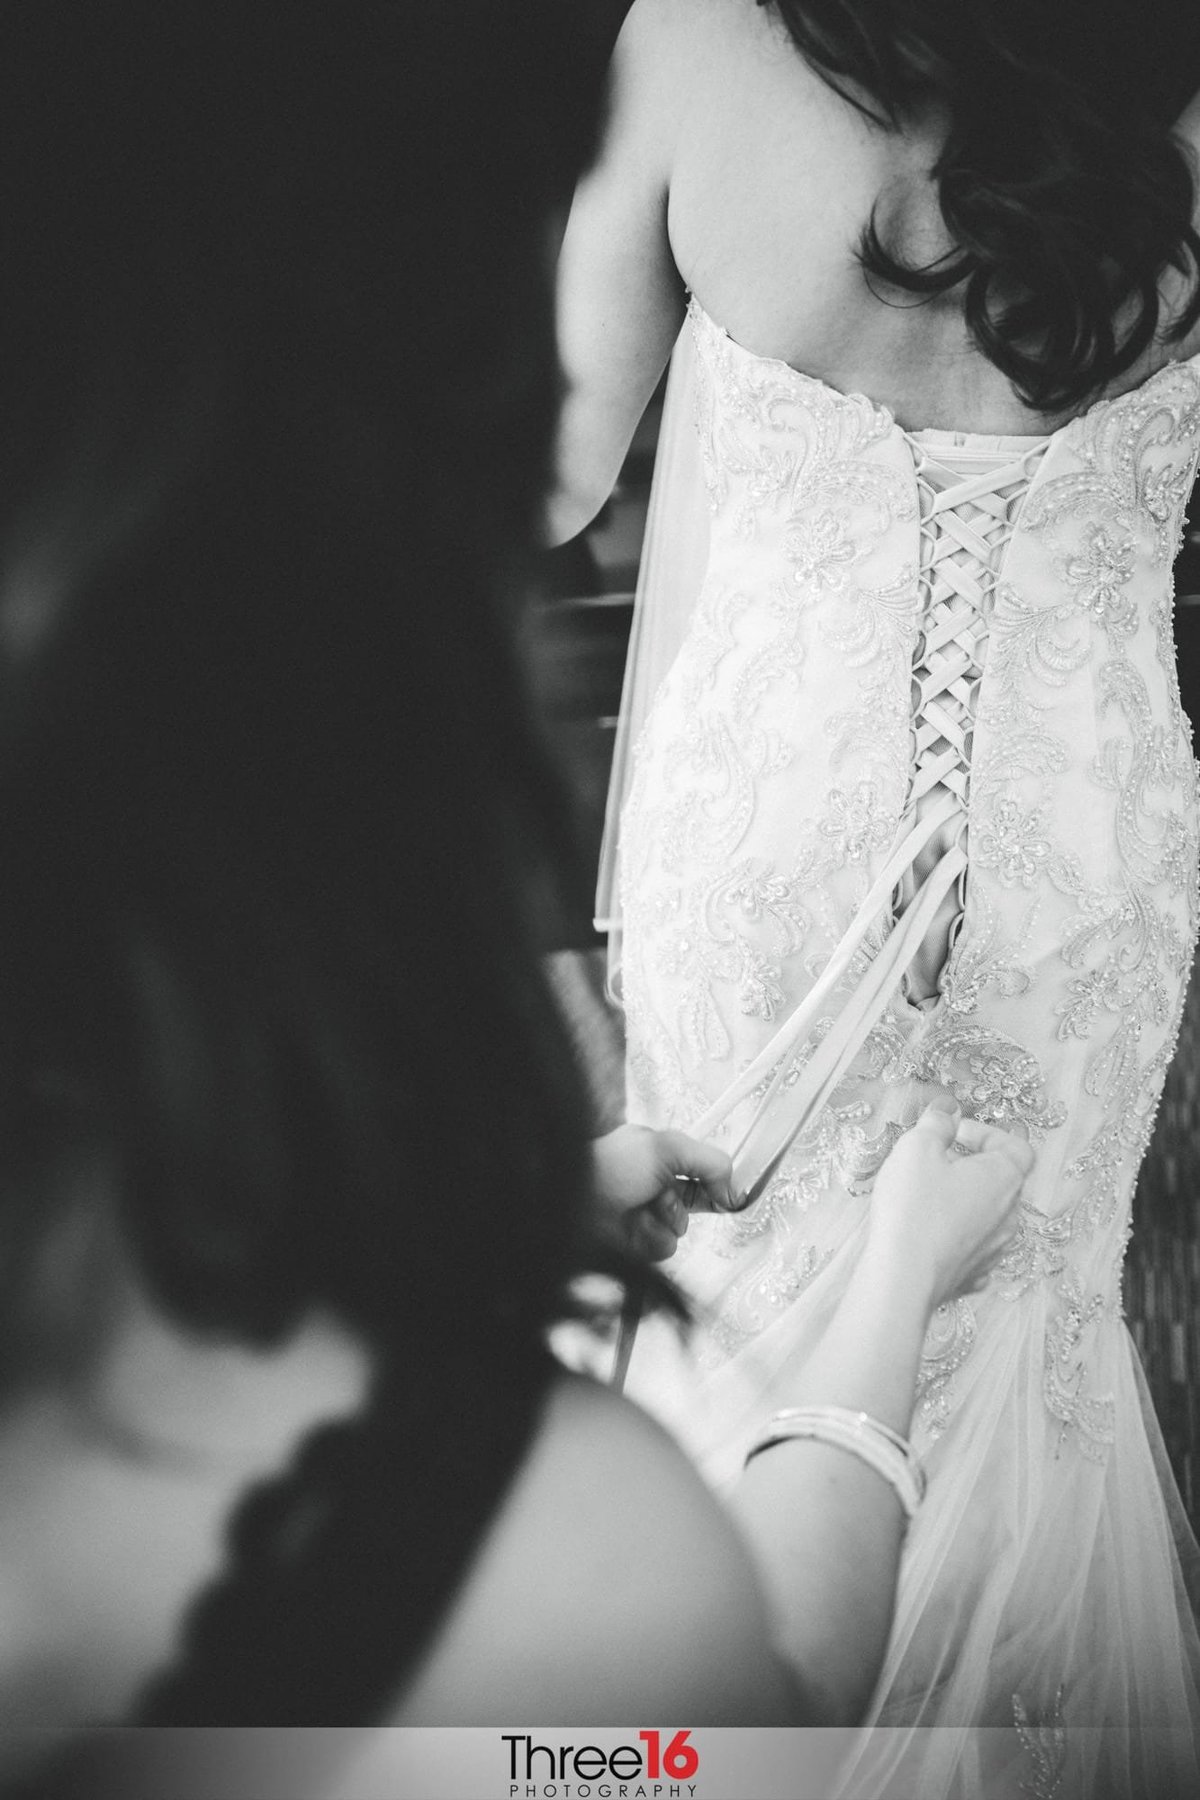 Bride having her wedding gown buttoned up